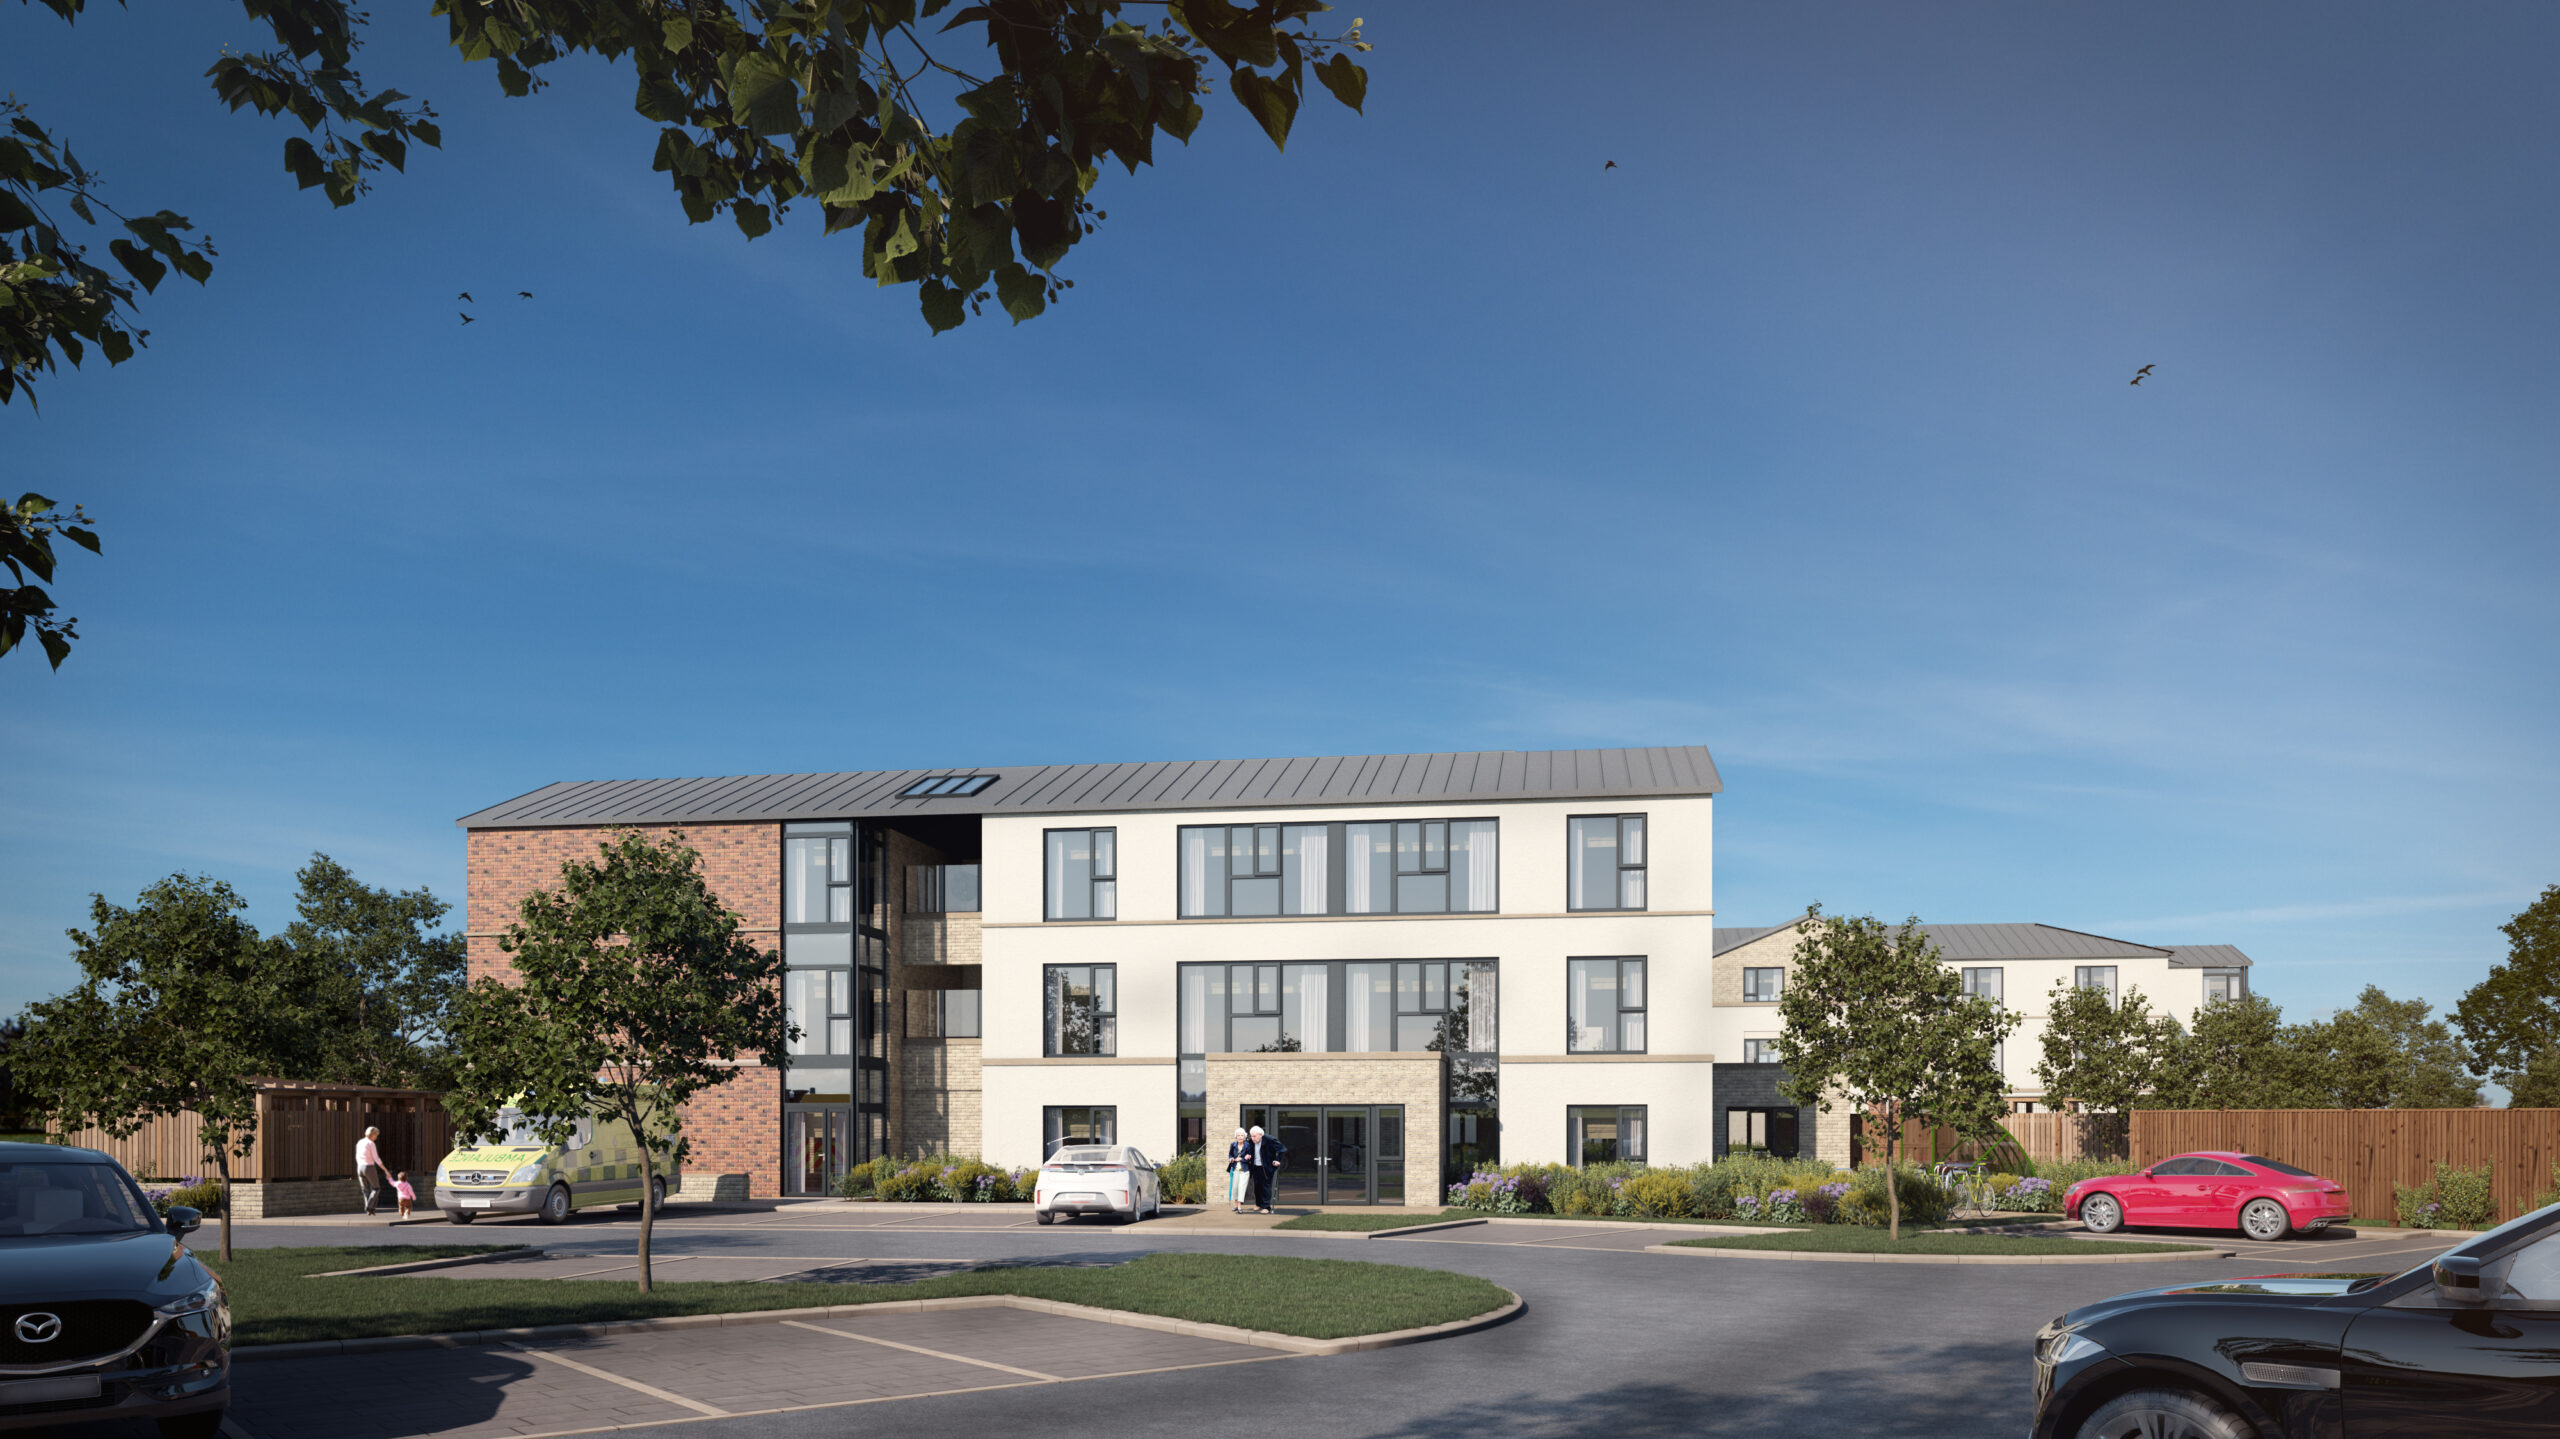 Care Home in Leominster - CGI